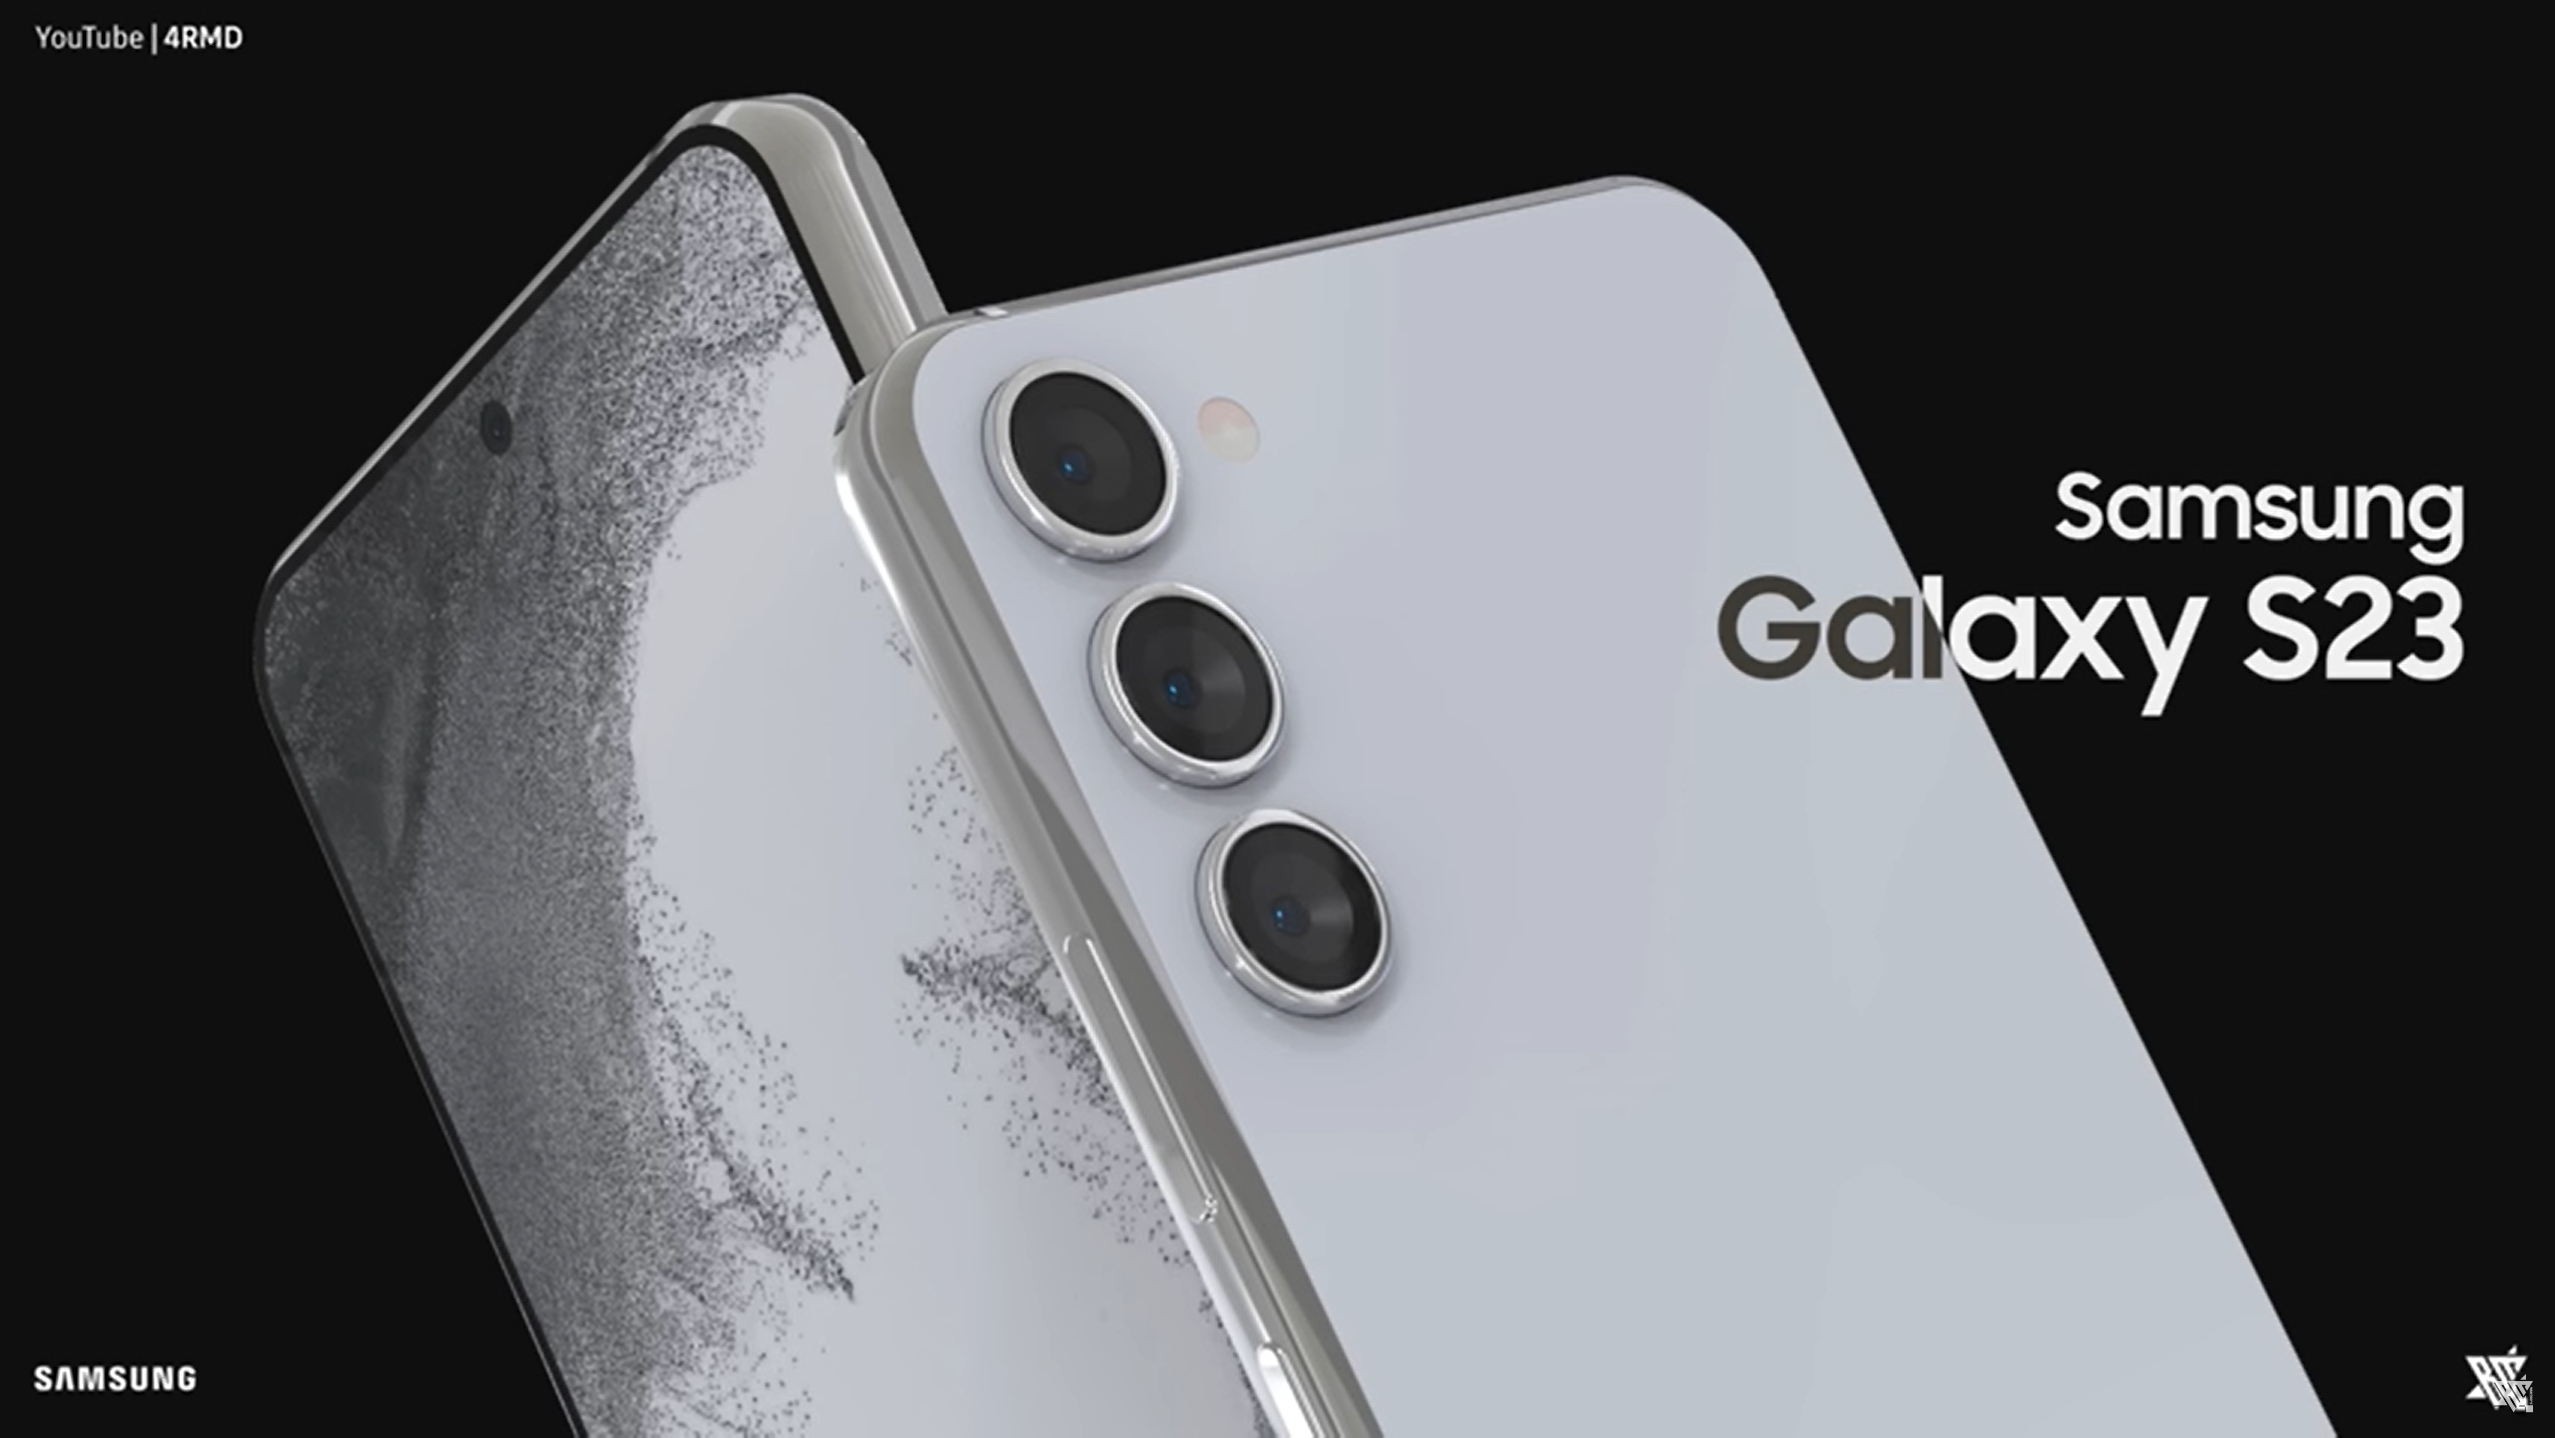 Galaxy S23 renders based on currently available leaks